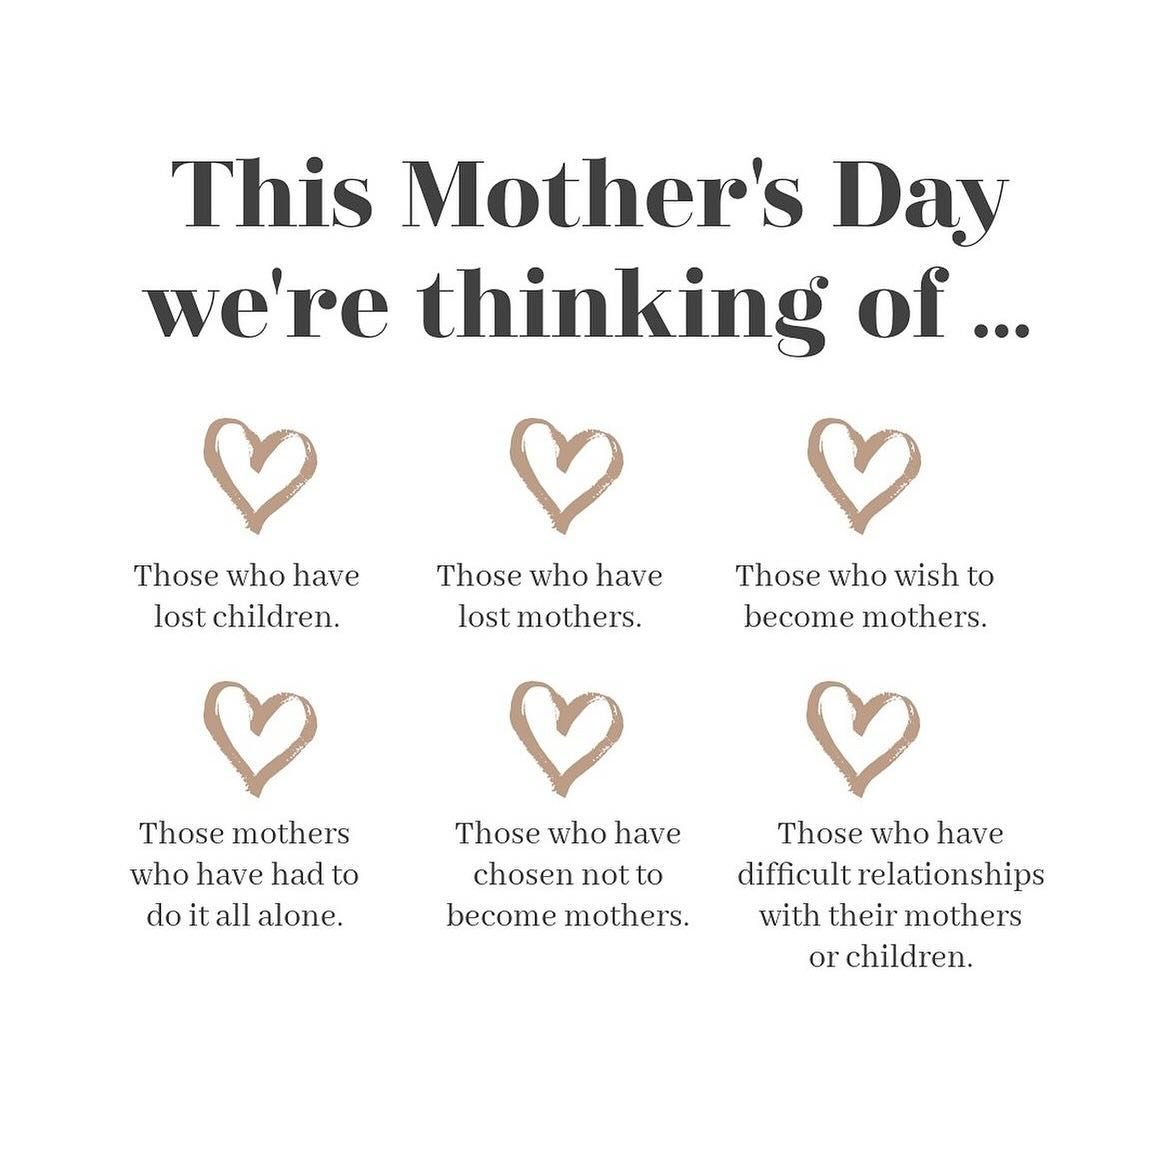 Sending love to everyone who is celebrating Mother's Day a bit differently today. You are special, you are appreciated &amp; you are loved!
Happy Mother's Day &amp; have a lovely Sunday 💖 
#denverchiropractor #allenspineandsport #greenwoodvillageco 